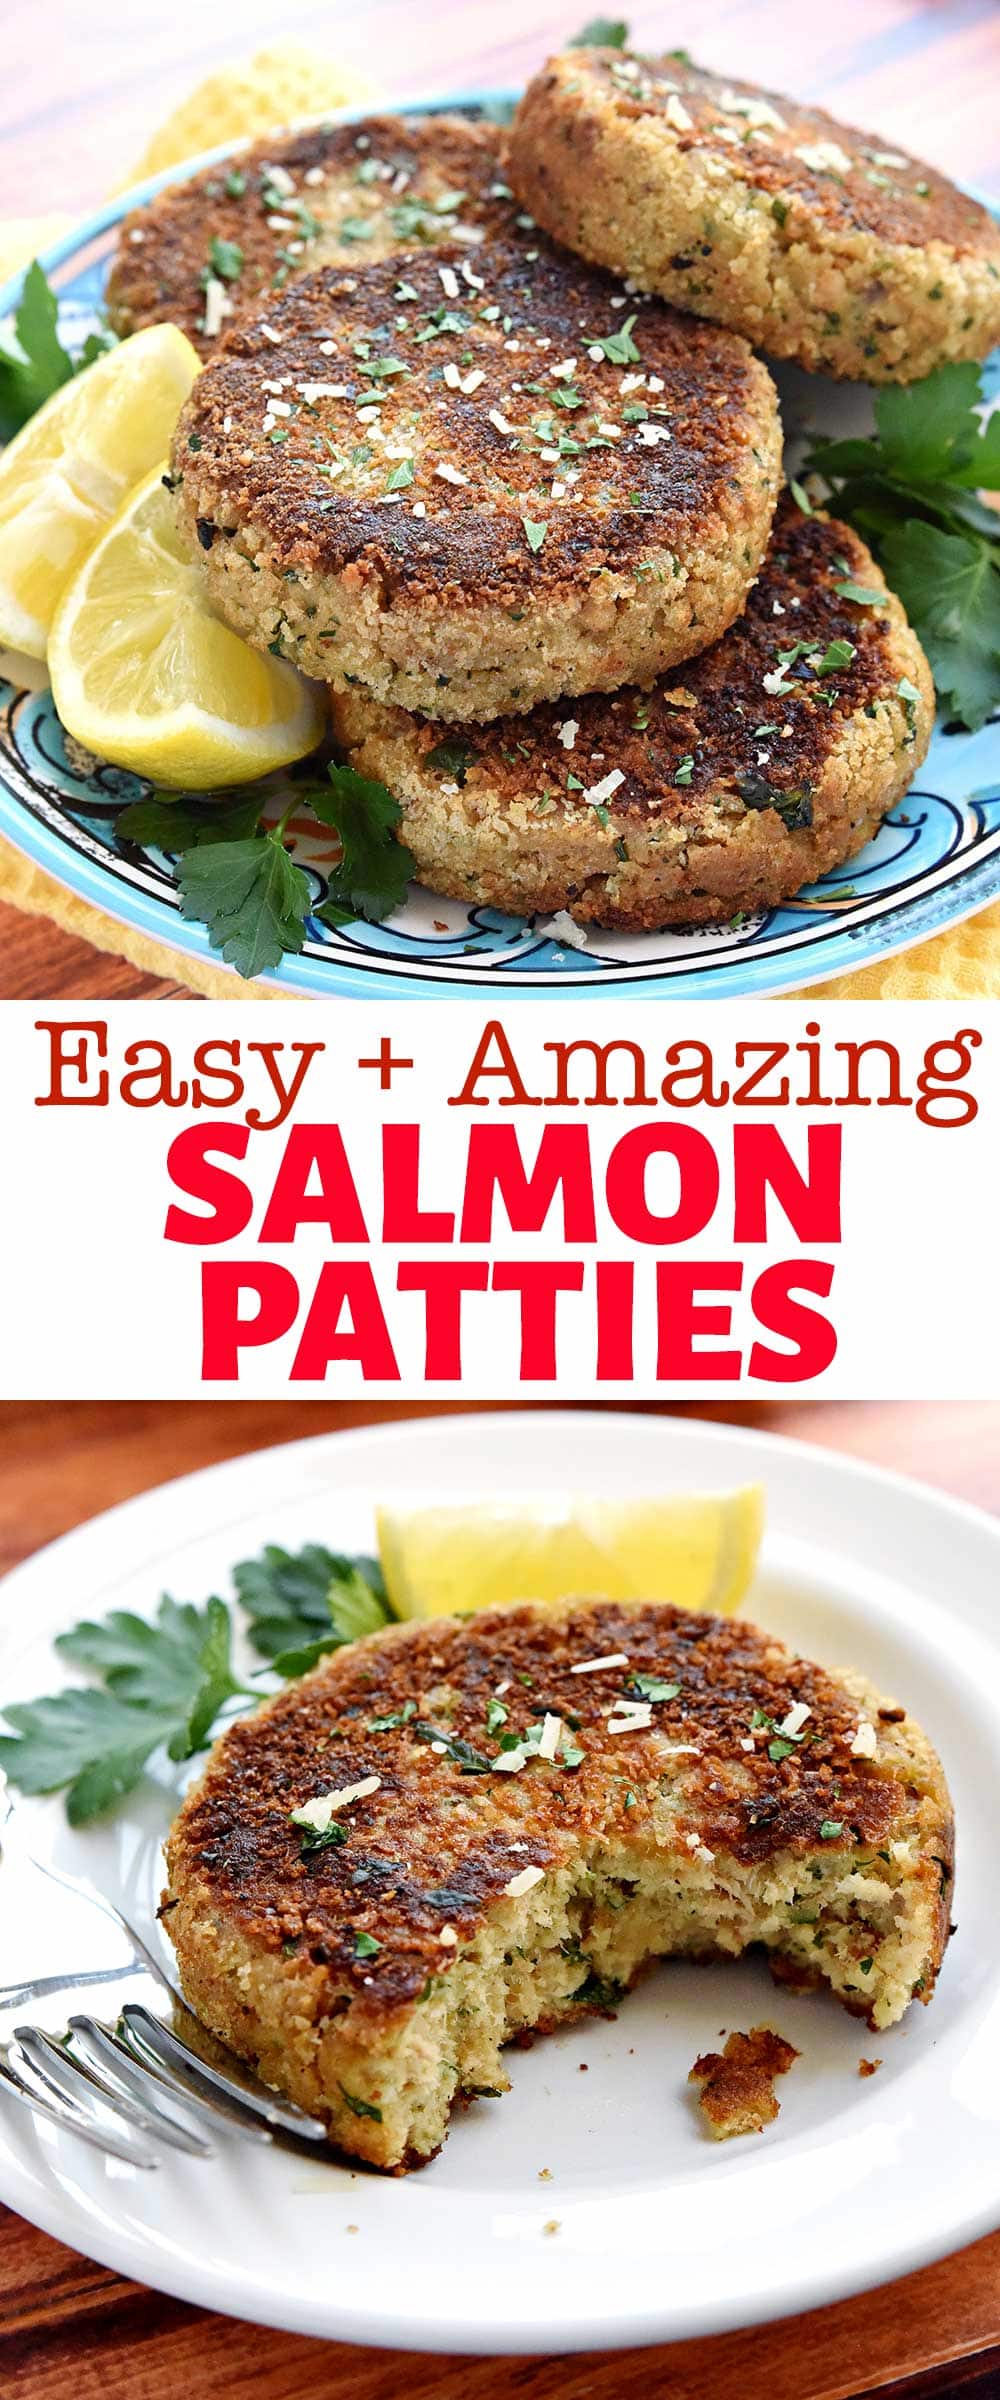 Salmon Patties ~ also known as Salmon Cakes or Salmon Croquettes, this flavorful, quick and easy salmon patty recipe is crunchy on the outside, tender on the inside, and perfect for getting more brain-boosting, heart-healthy omega-3s into your diet! | FiveHeartHome.com via @fivehearthome